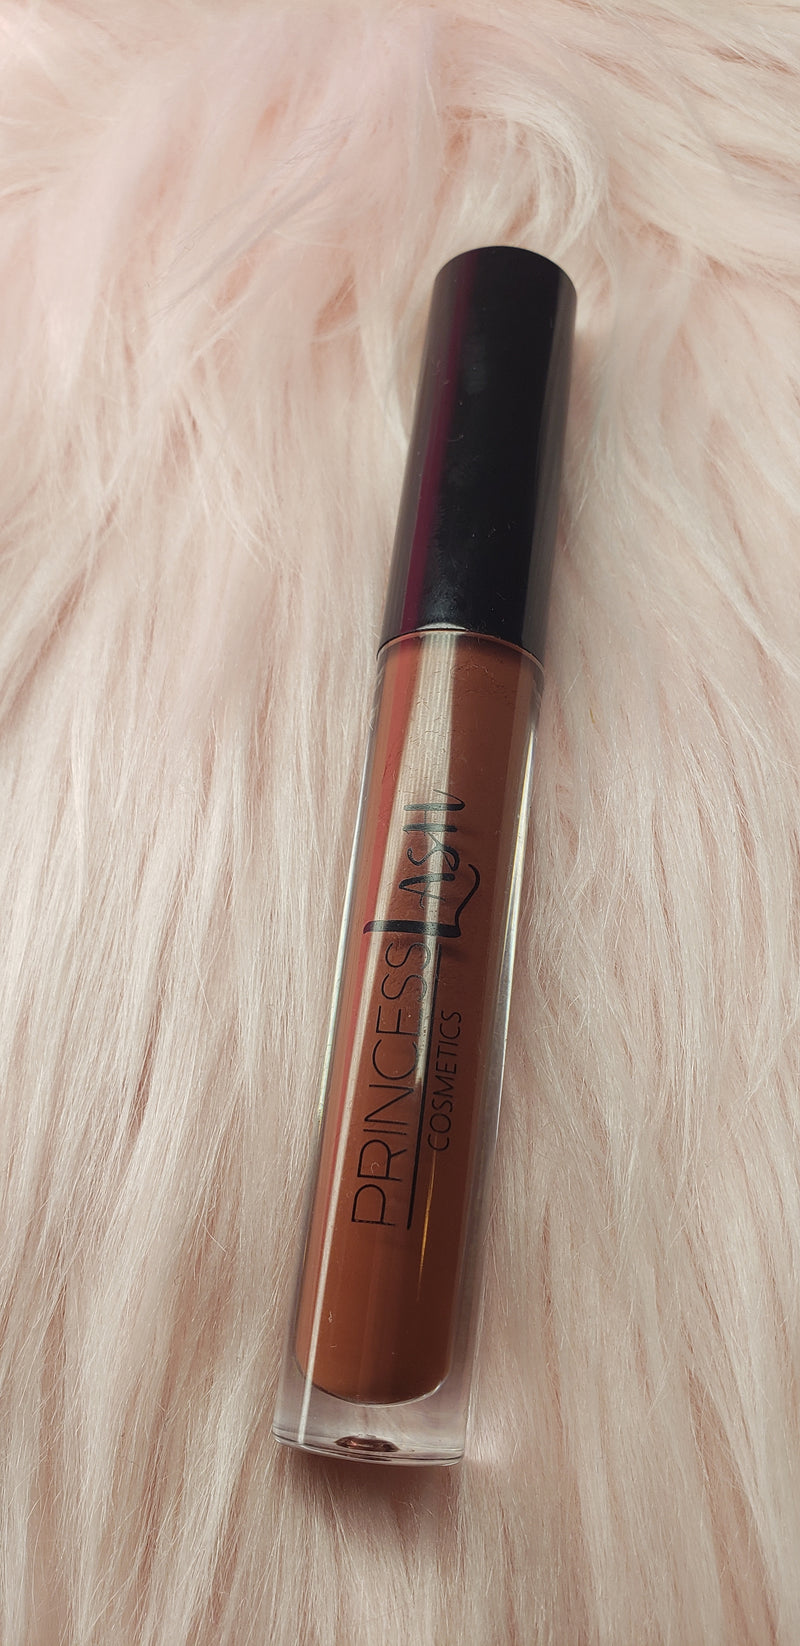 Heiress brown lip gloss from Princess Lash, LLC. A black owned cosmetic line